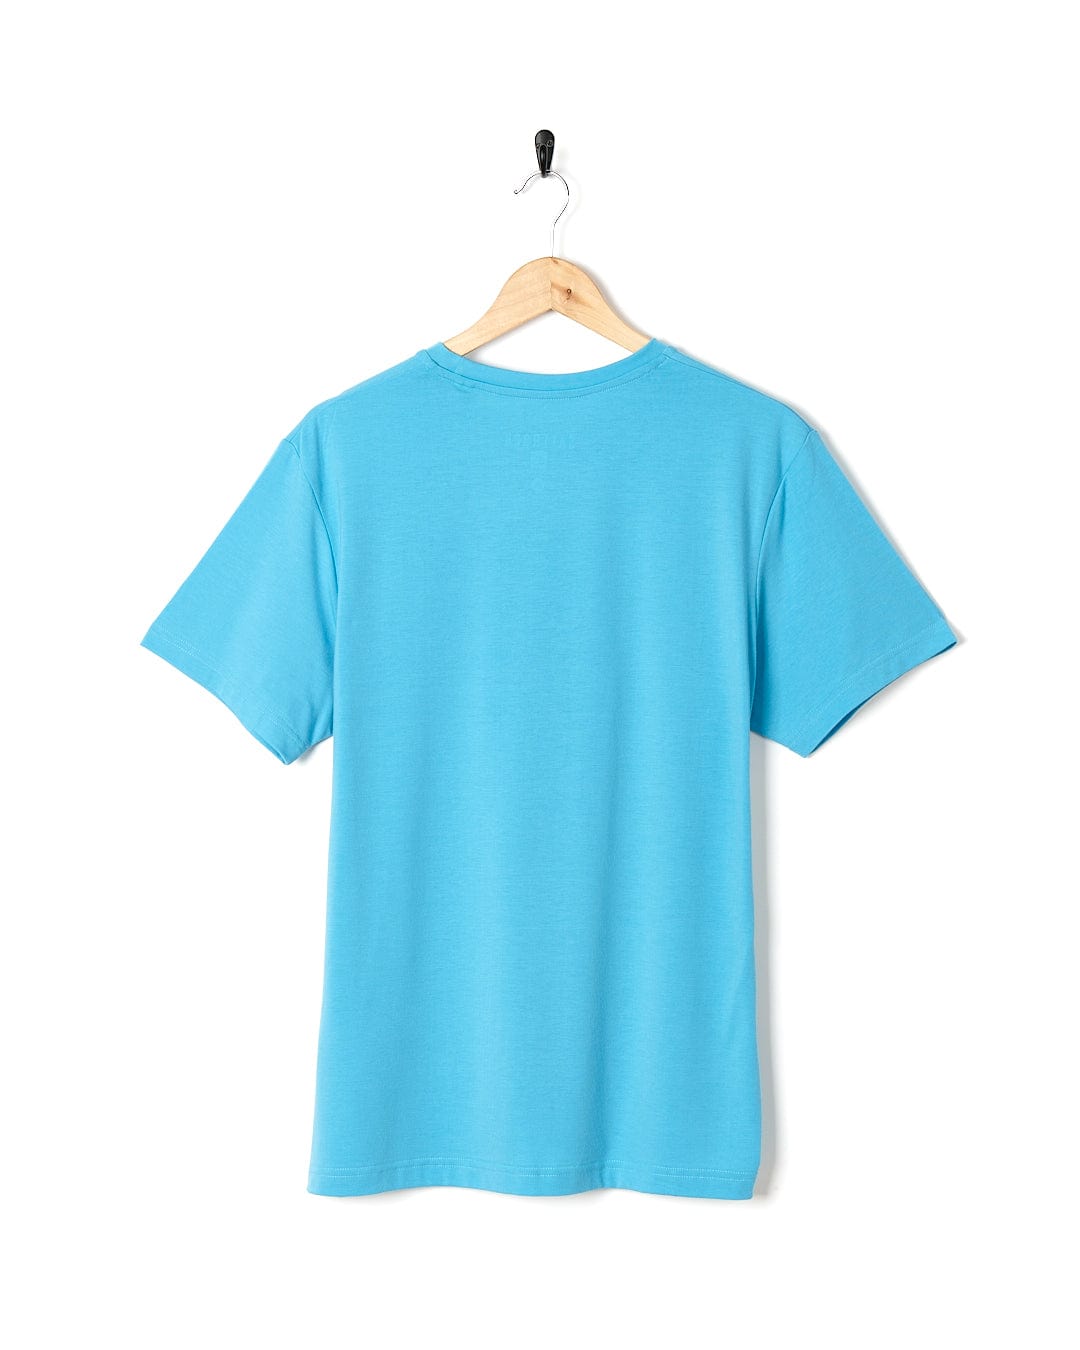 A Saltrock Flame Tri - Mens Recycled Short Sleeve T-Shirt - Teal hanging on a wooden hanger.